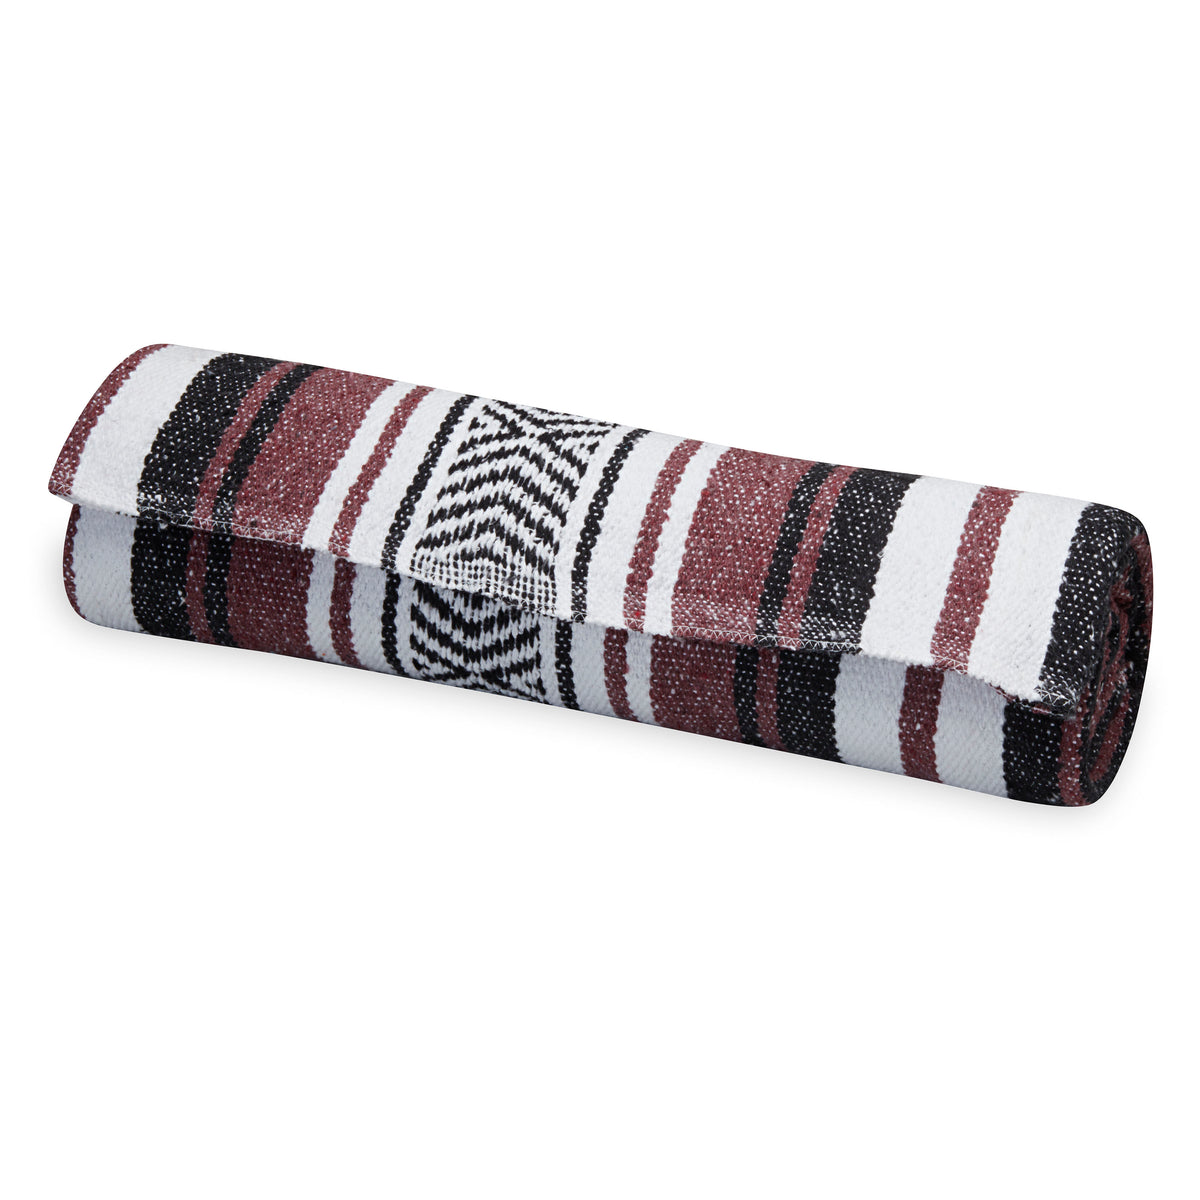 Zulay Kitchen Home Authentic Mexican Blankets - Hand Woven Yoga